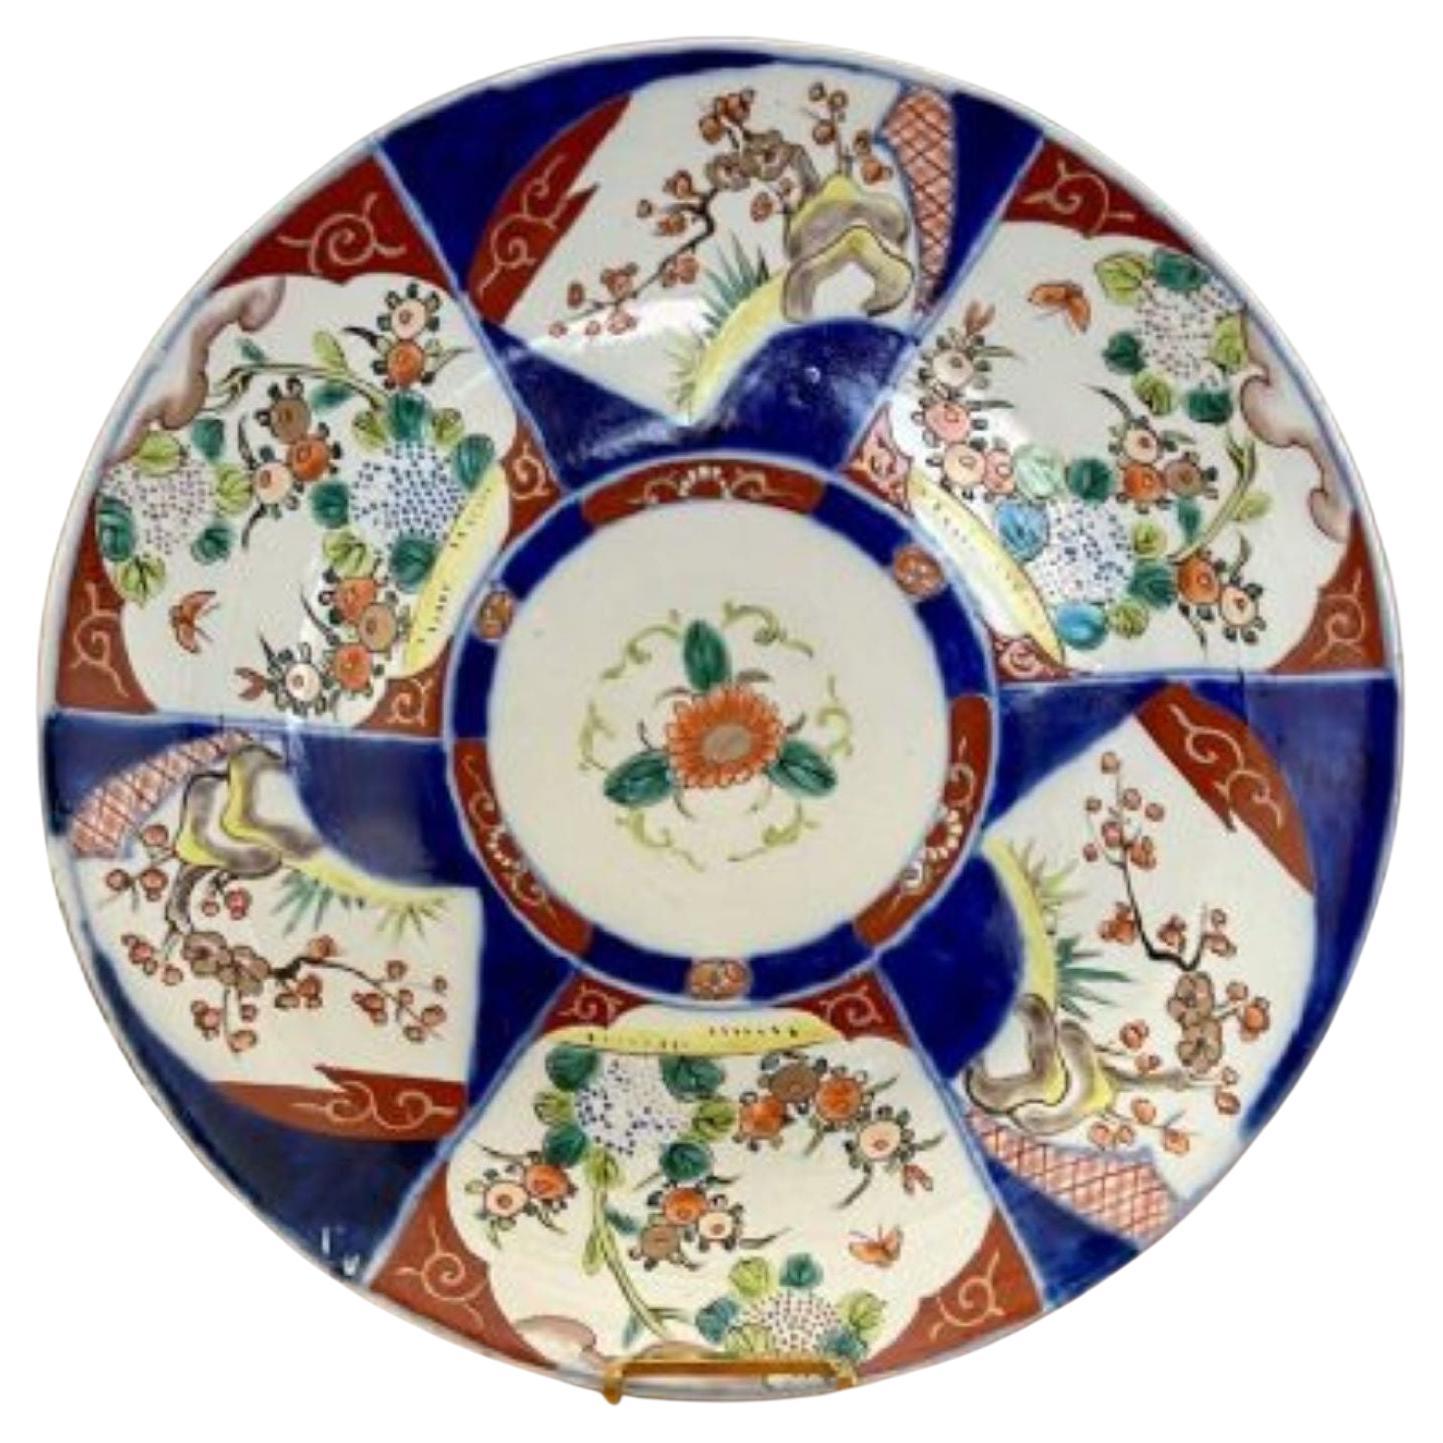 Quality antique Japanese Imari plate For Sale